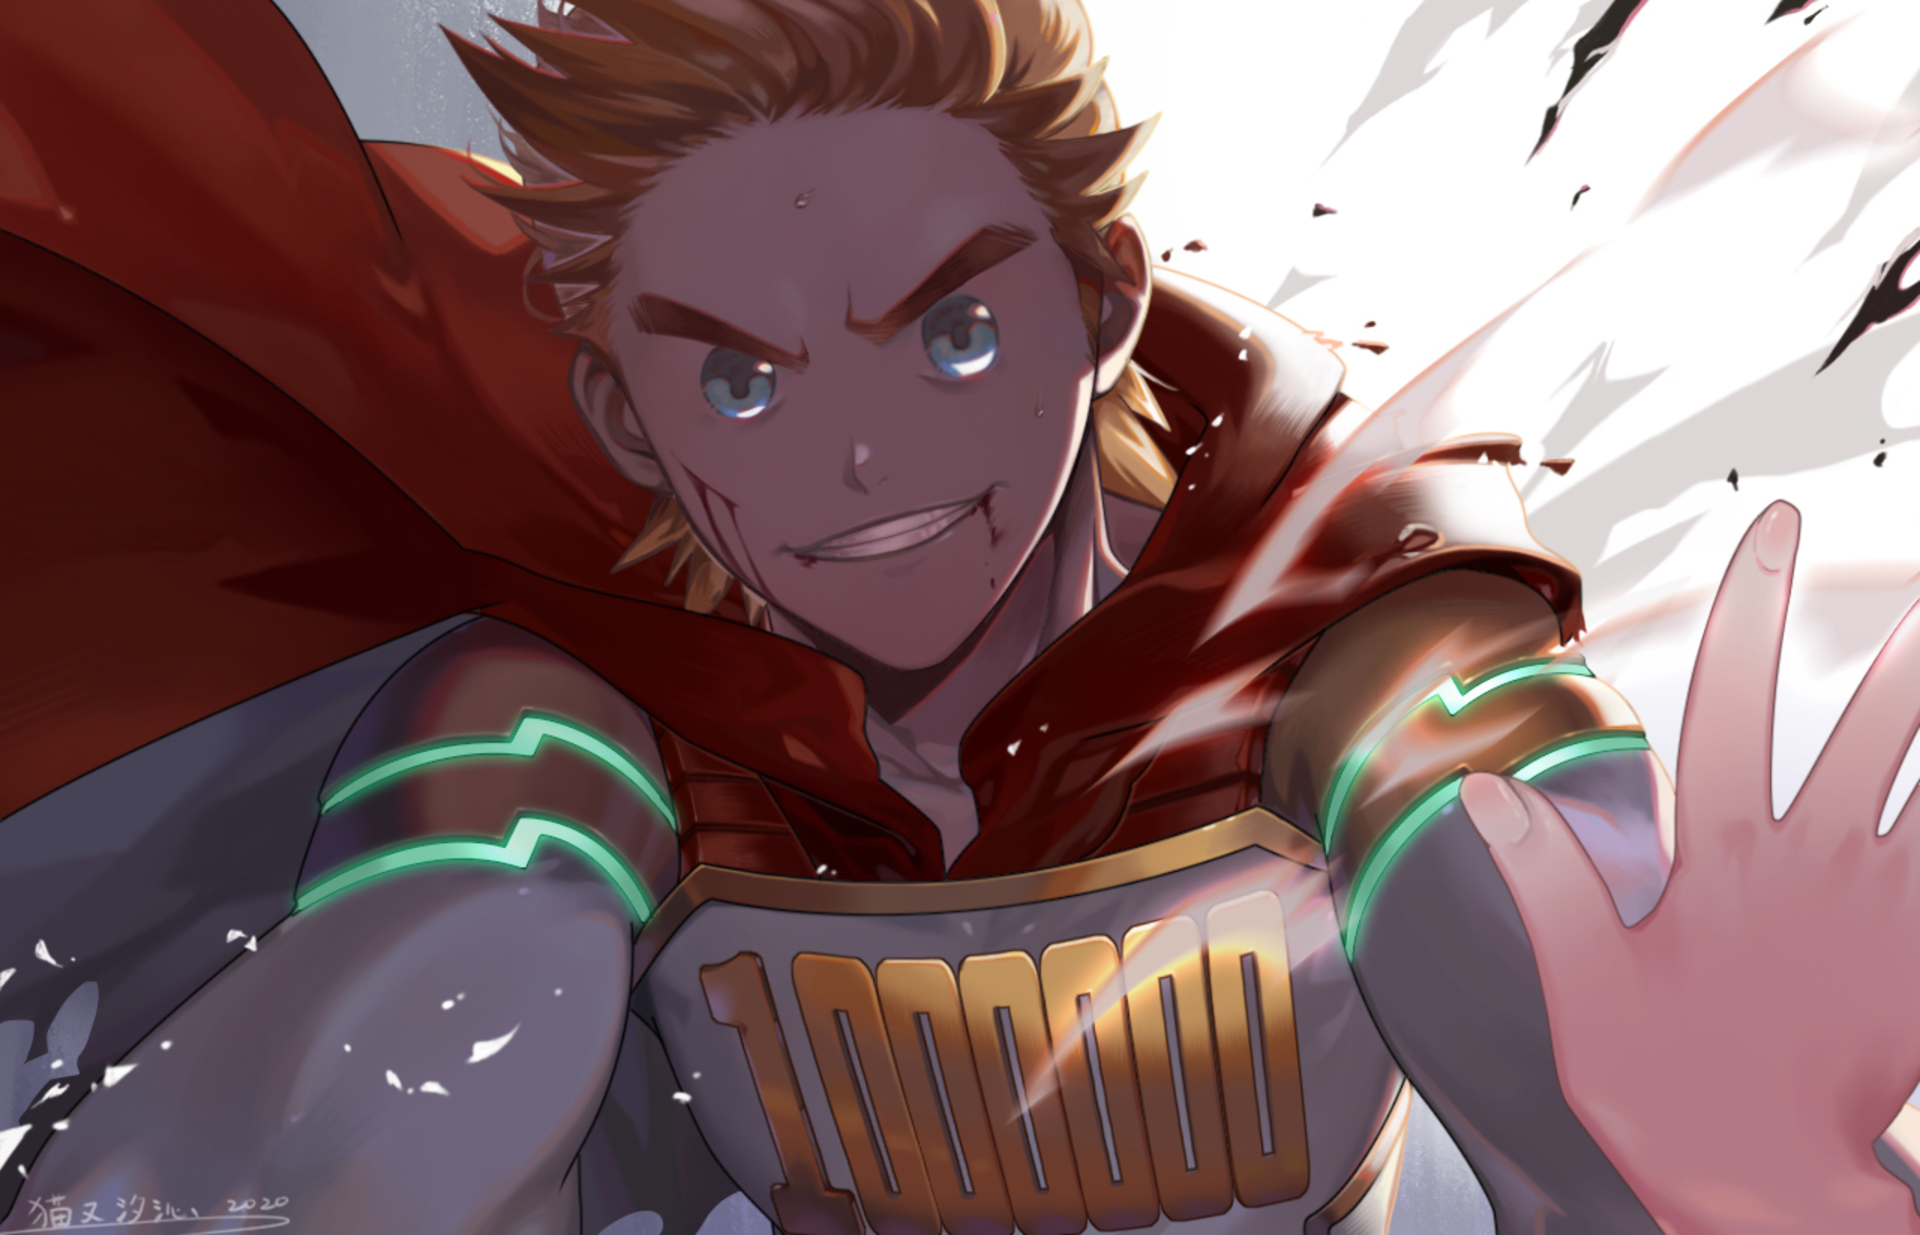 Mirio Togata hurt but still smiling by 猫 又 汐 沁. Anime HD Wallpapers and Bac...